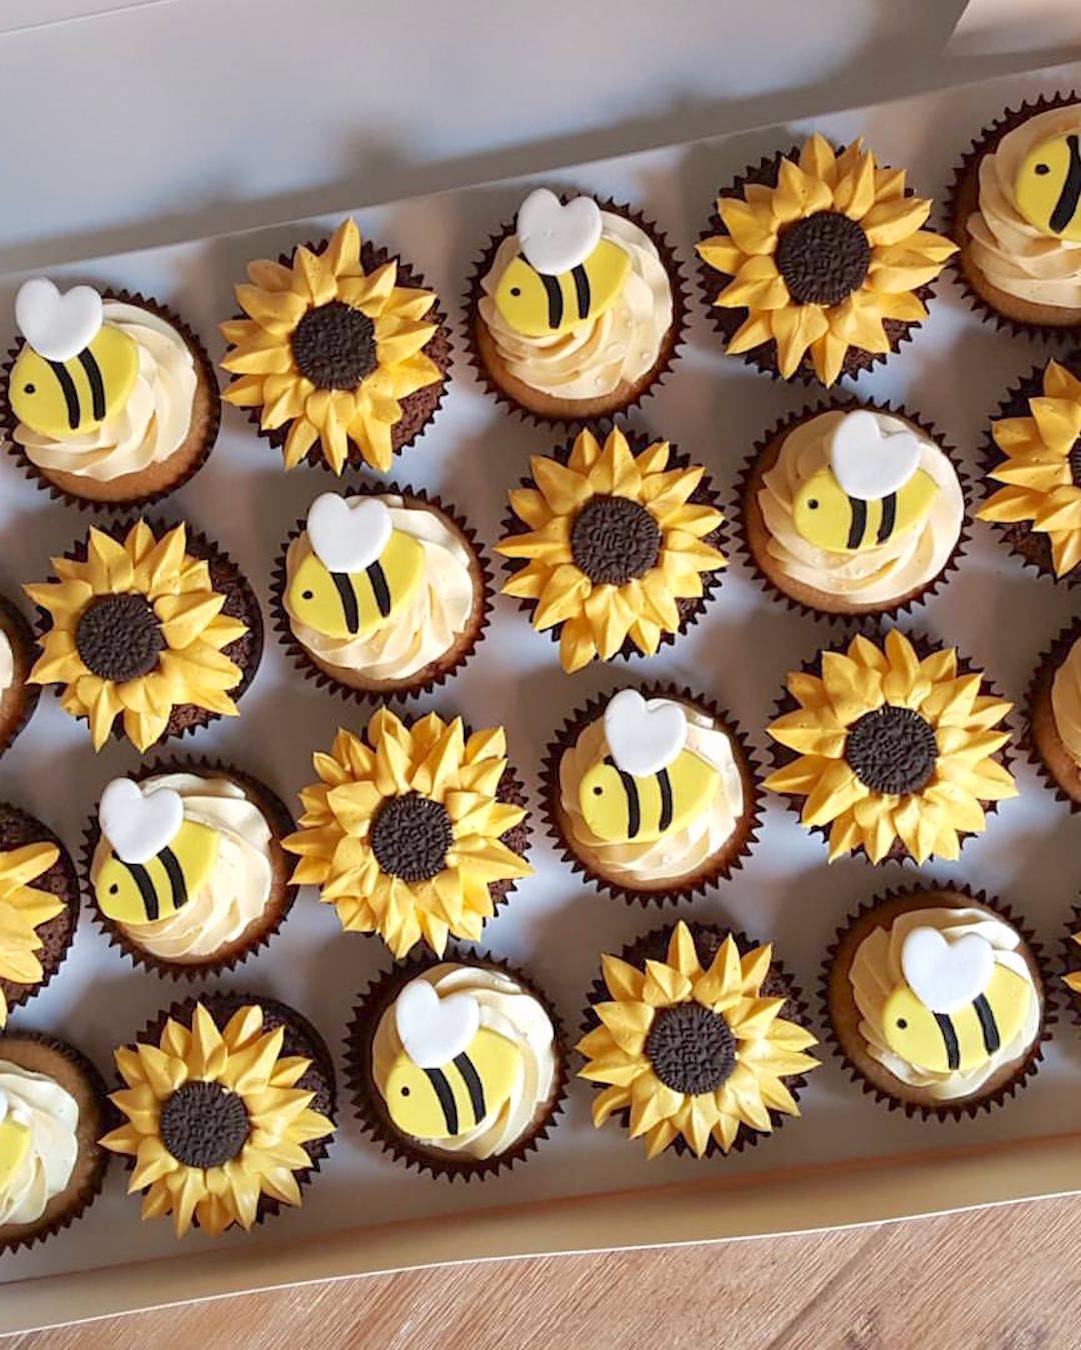 Buttercream Bees and Sunflowers Cupcakes in Adelaide by Brown Sugared Love.